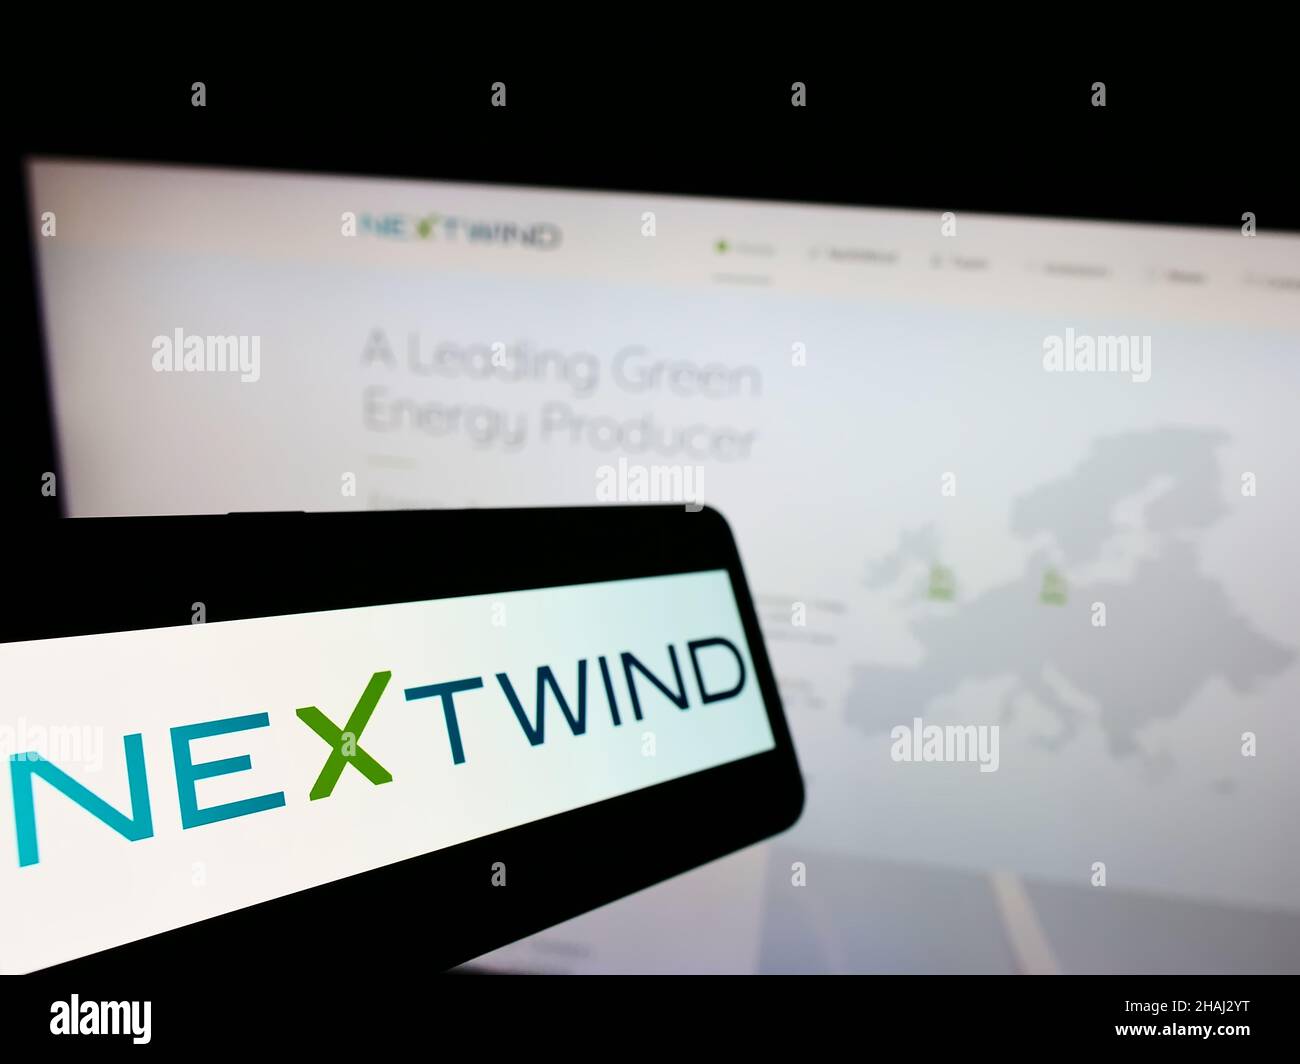 Cellphone with logo of wind energy company NeXtWind Management GmbH on screen in front of business website. Focus on center-left of phone display. Stock Photo